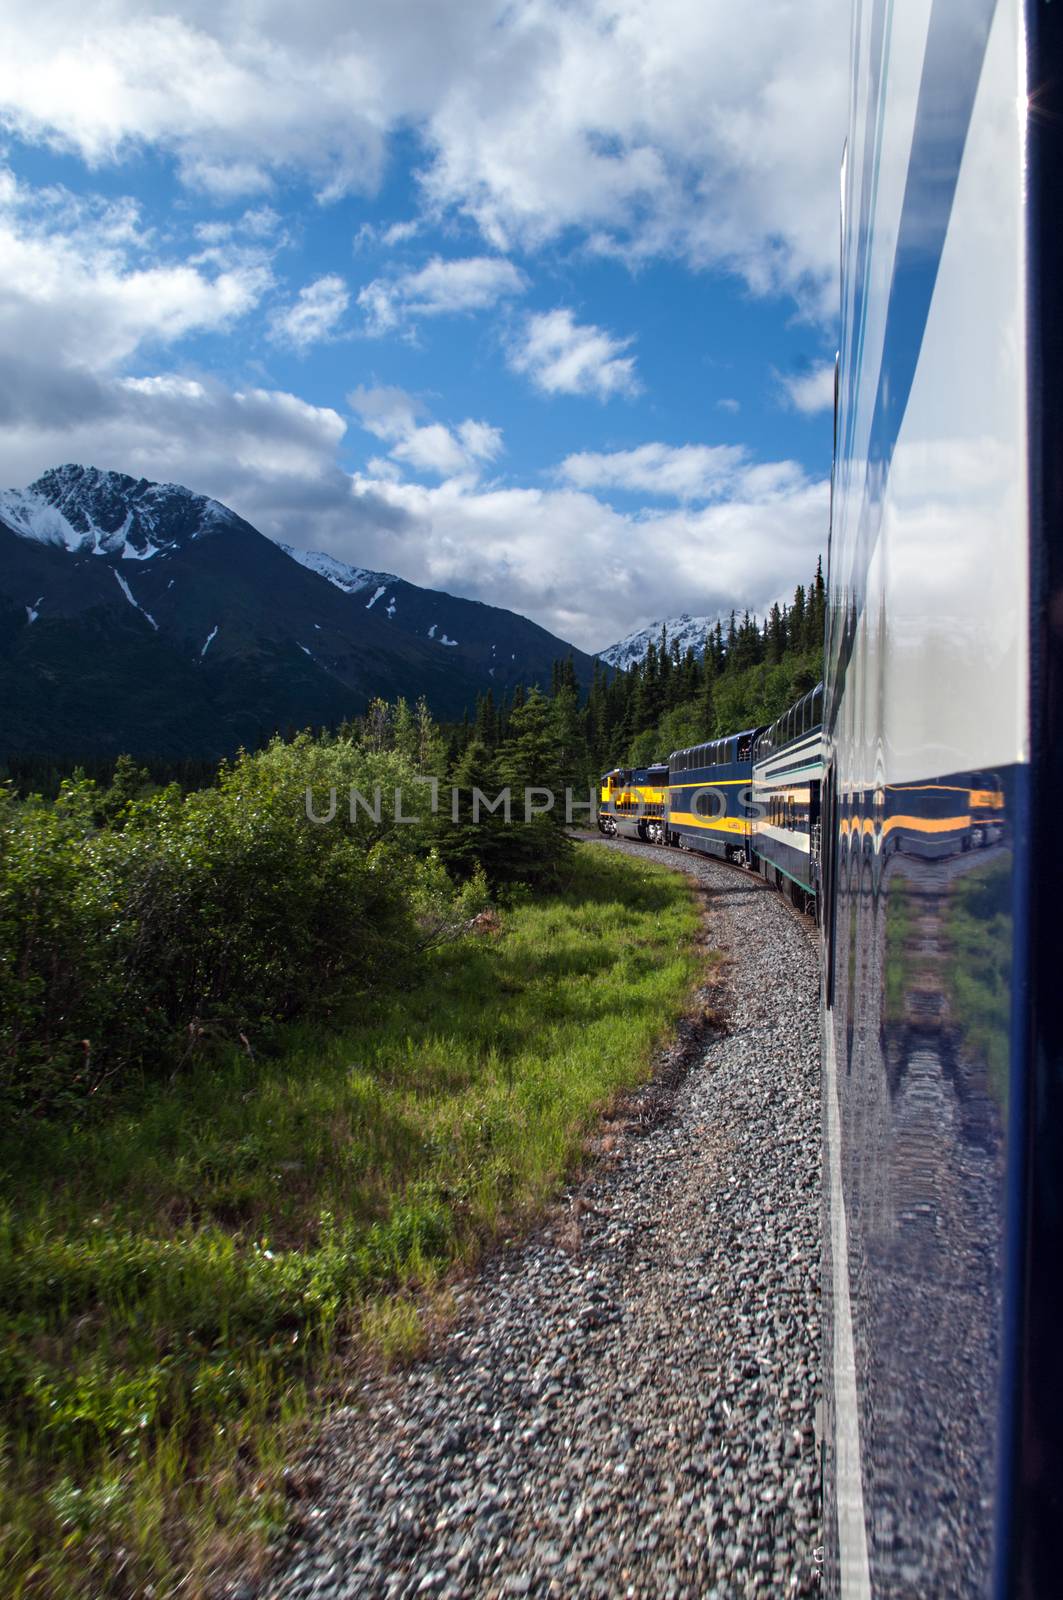 Alaskan Railway with a passenger train from Denali to Whitter